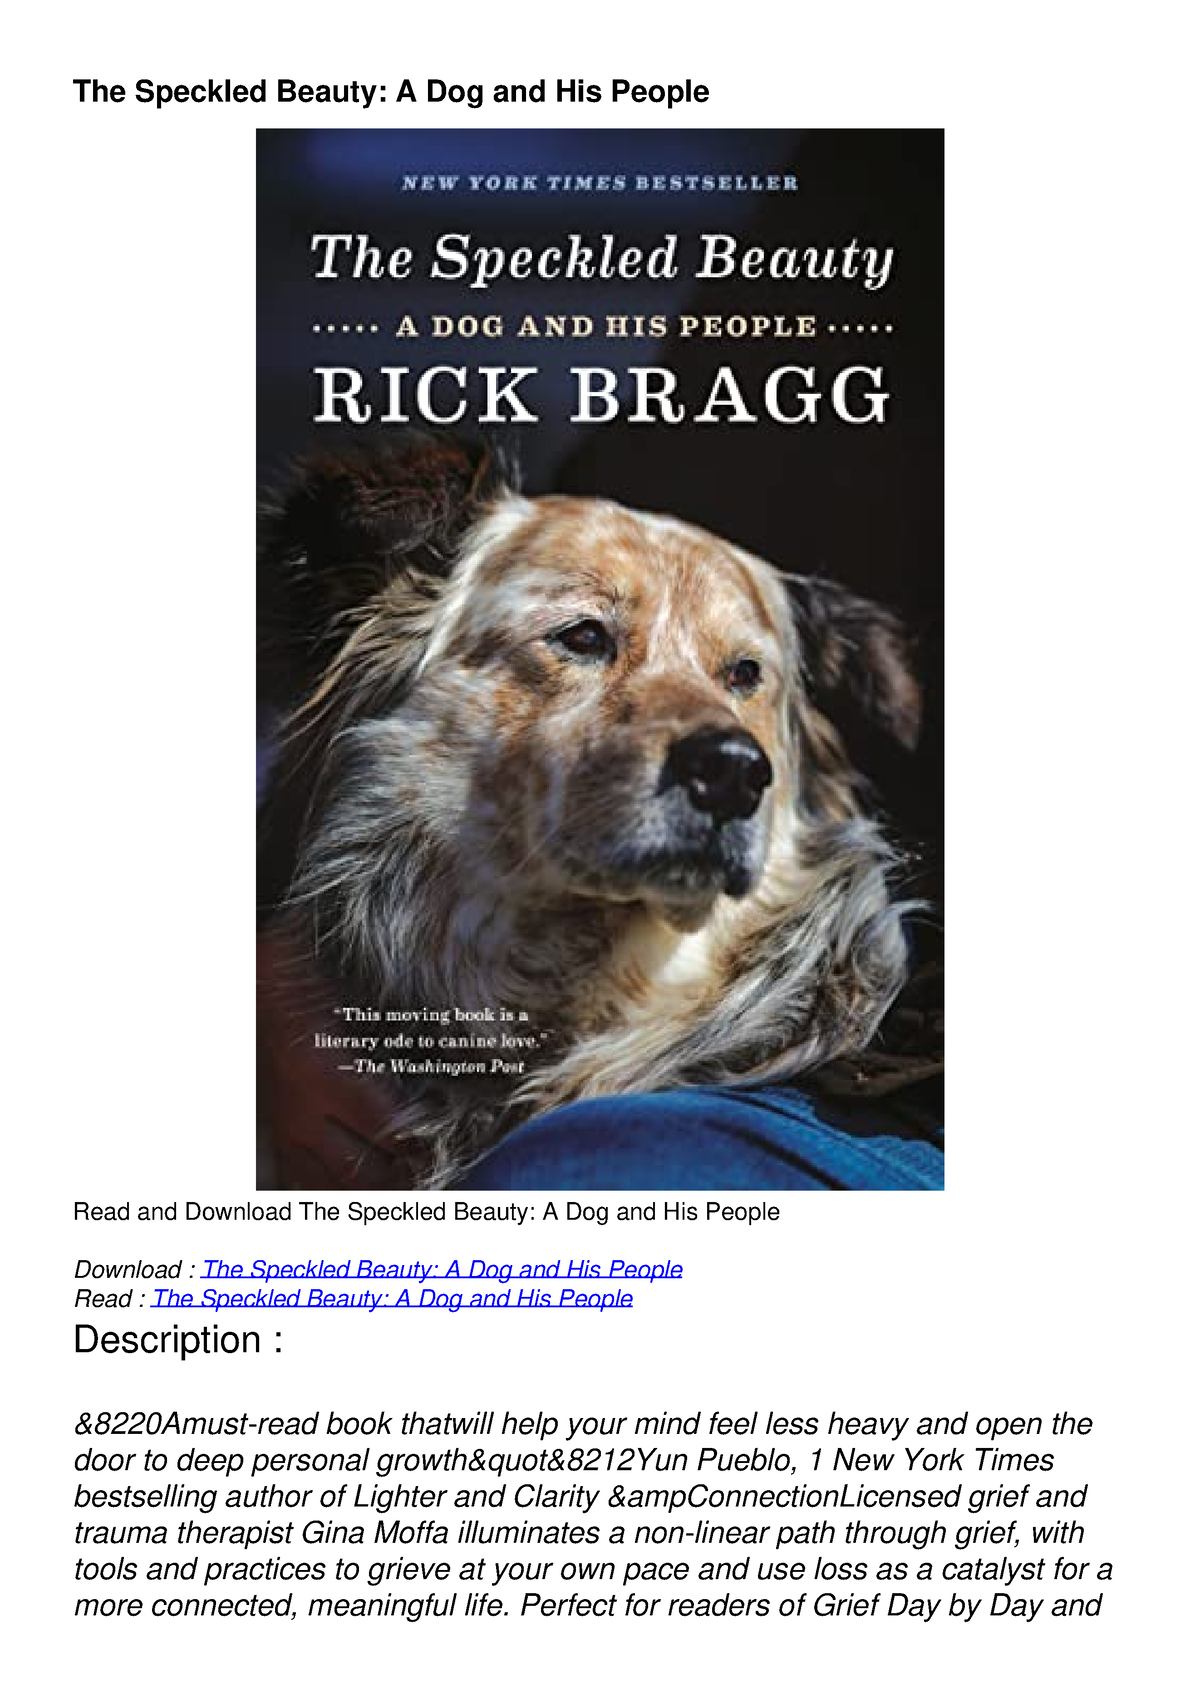 [READ DOWNLOAD] The Speckled Beauty: A Dog and His People - The